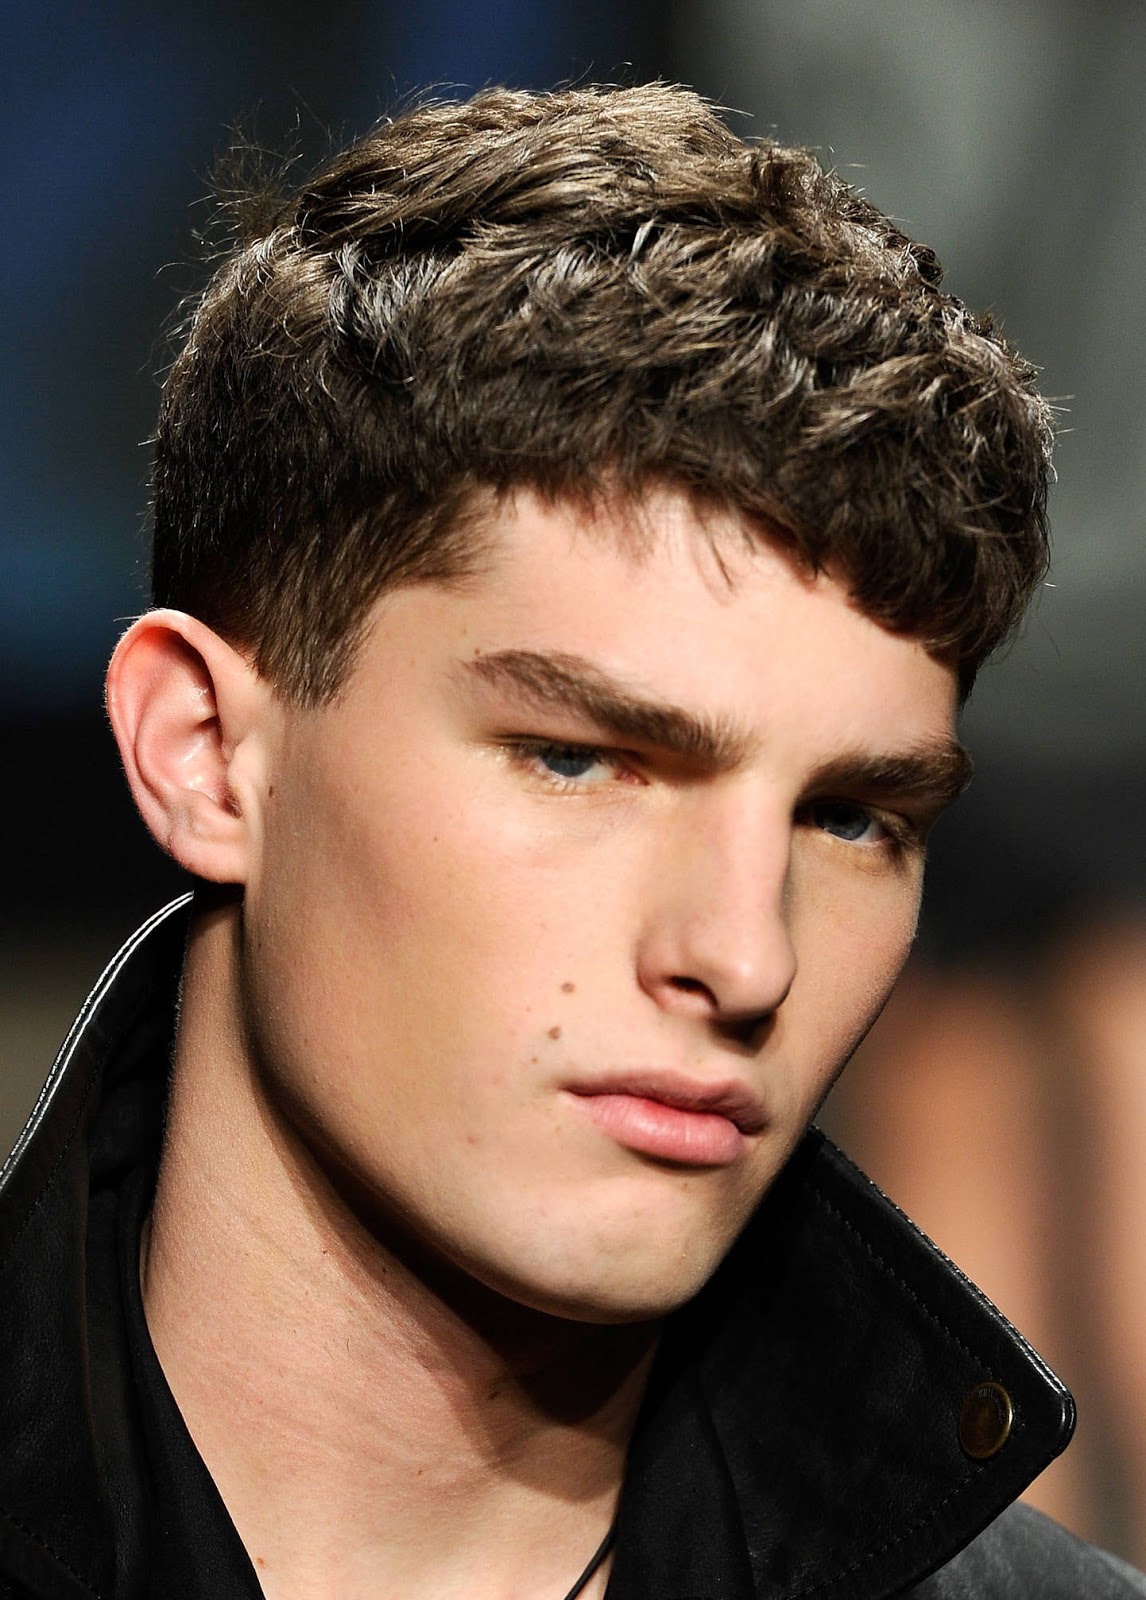 Haircuts for Men with Curly Hair